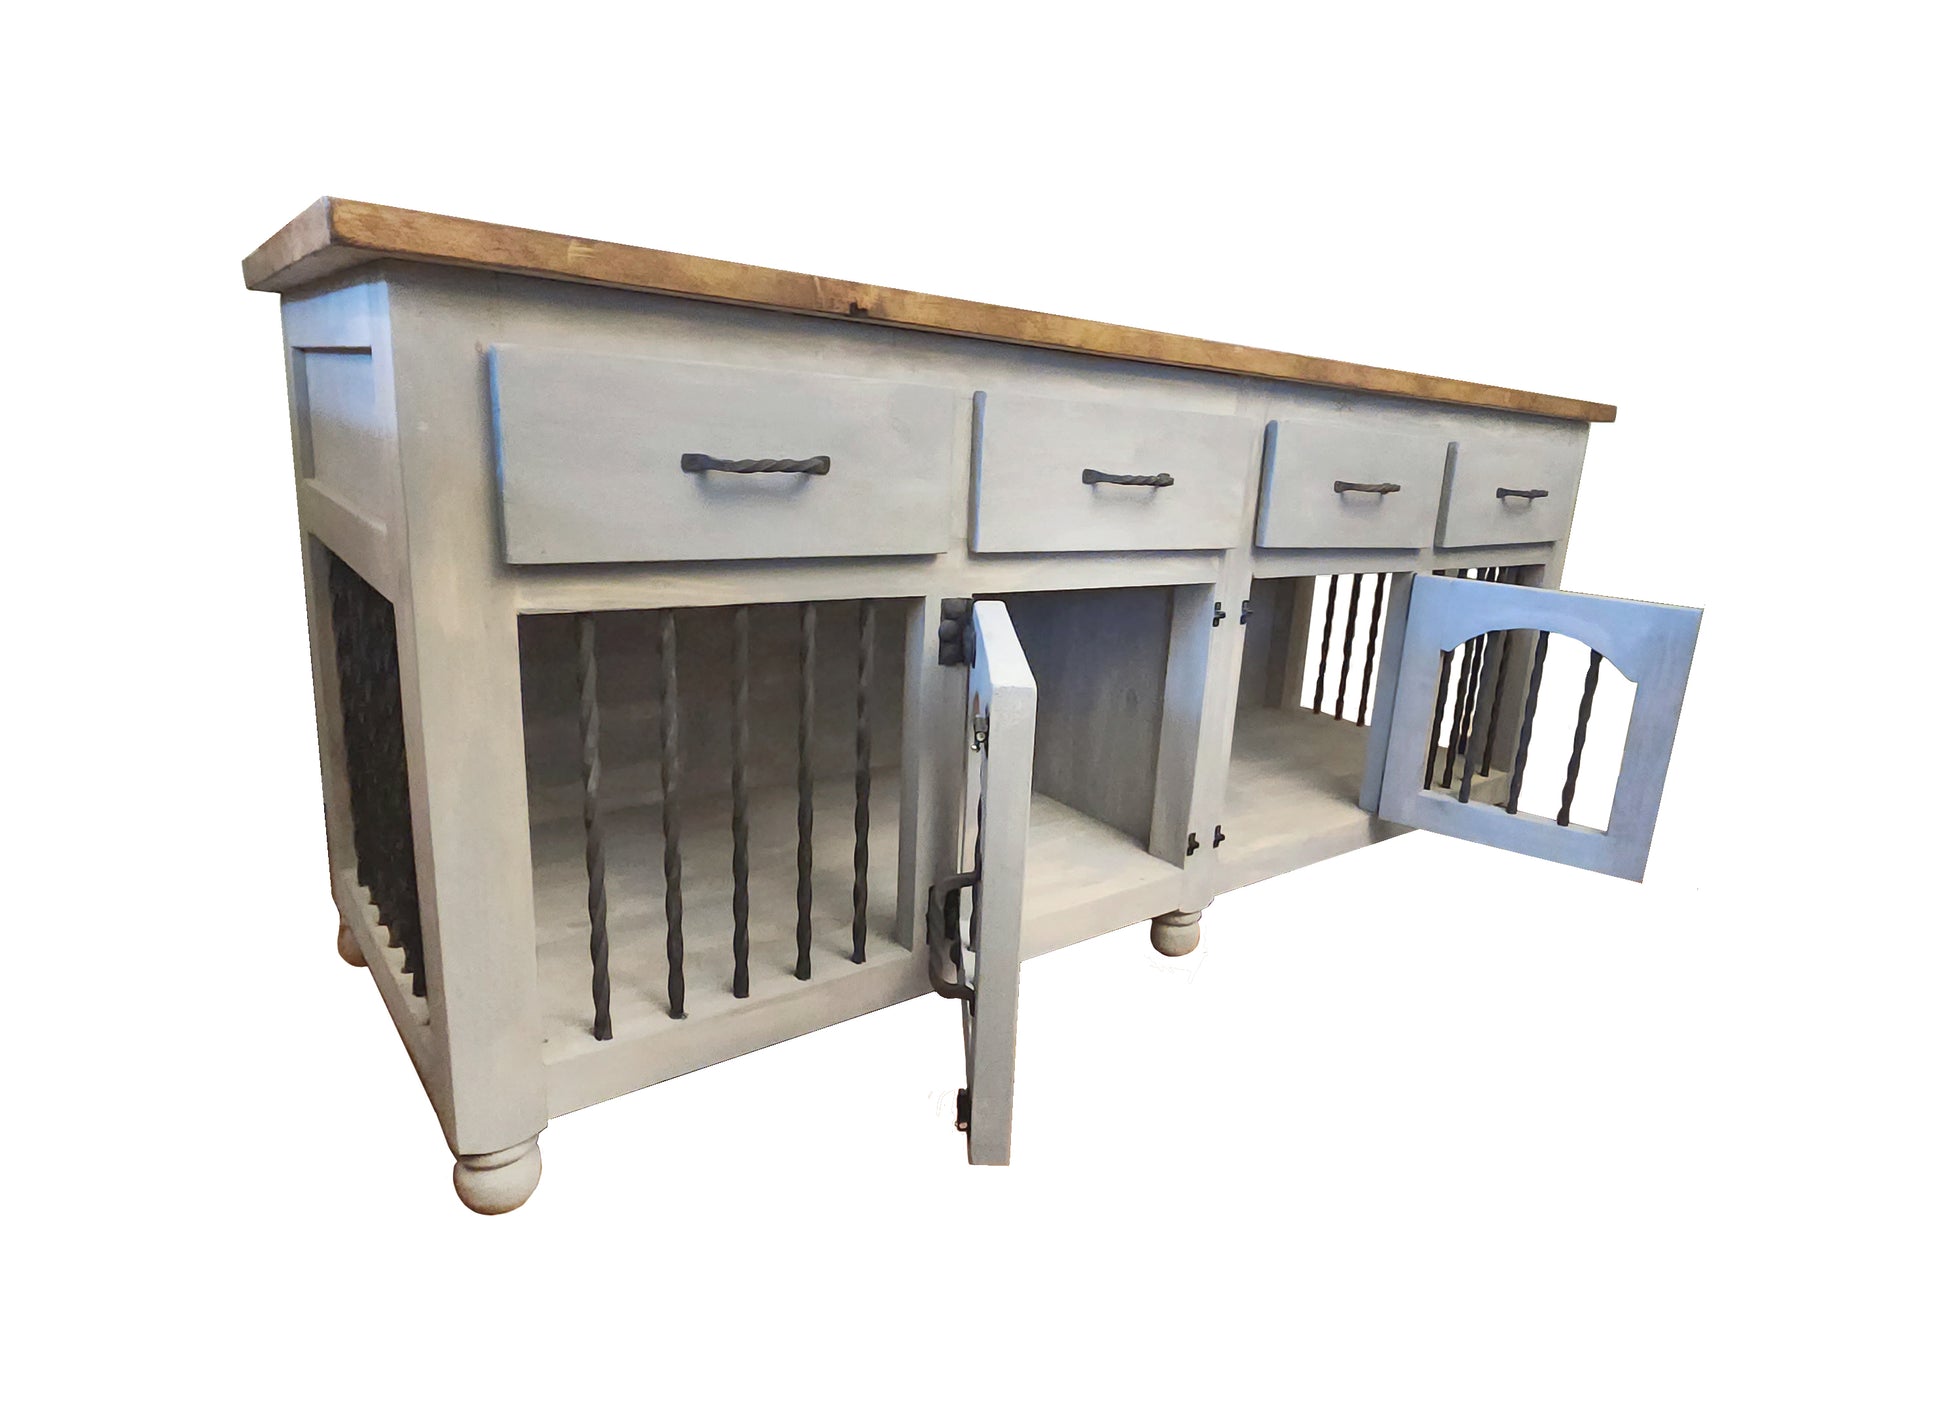 Gray rustic cottage - Double dog crate furniture - 84"L x 28"W x 36"H - The Dog Branch Large double dog crate furniture, Custom wood dog kennel, Farmhouse handcrafted woodworking, XXL size dog kennel, barn sliding door cabinet, wood dog crates, distressed white, wood stain dog kennels